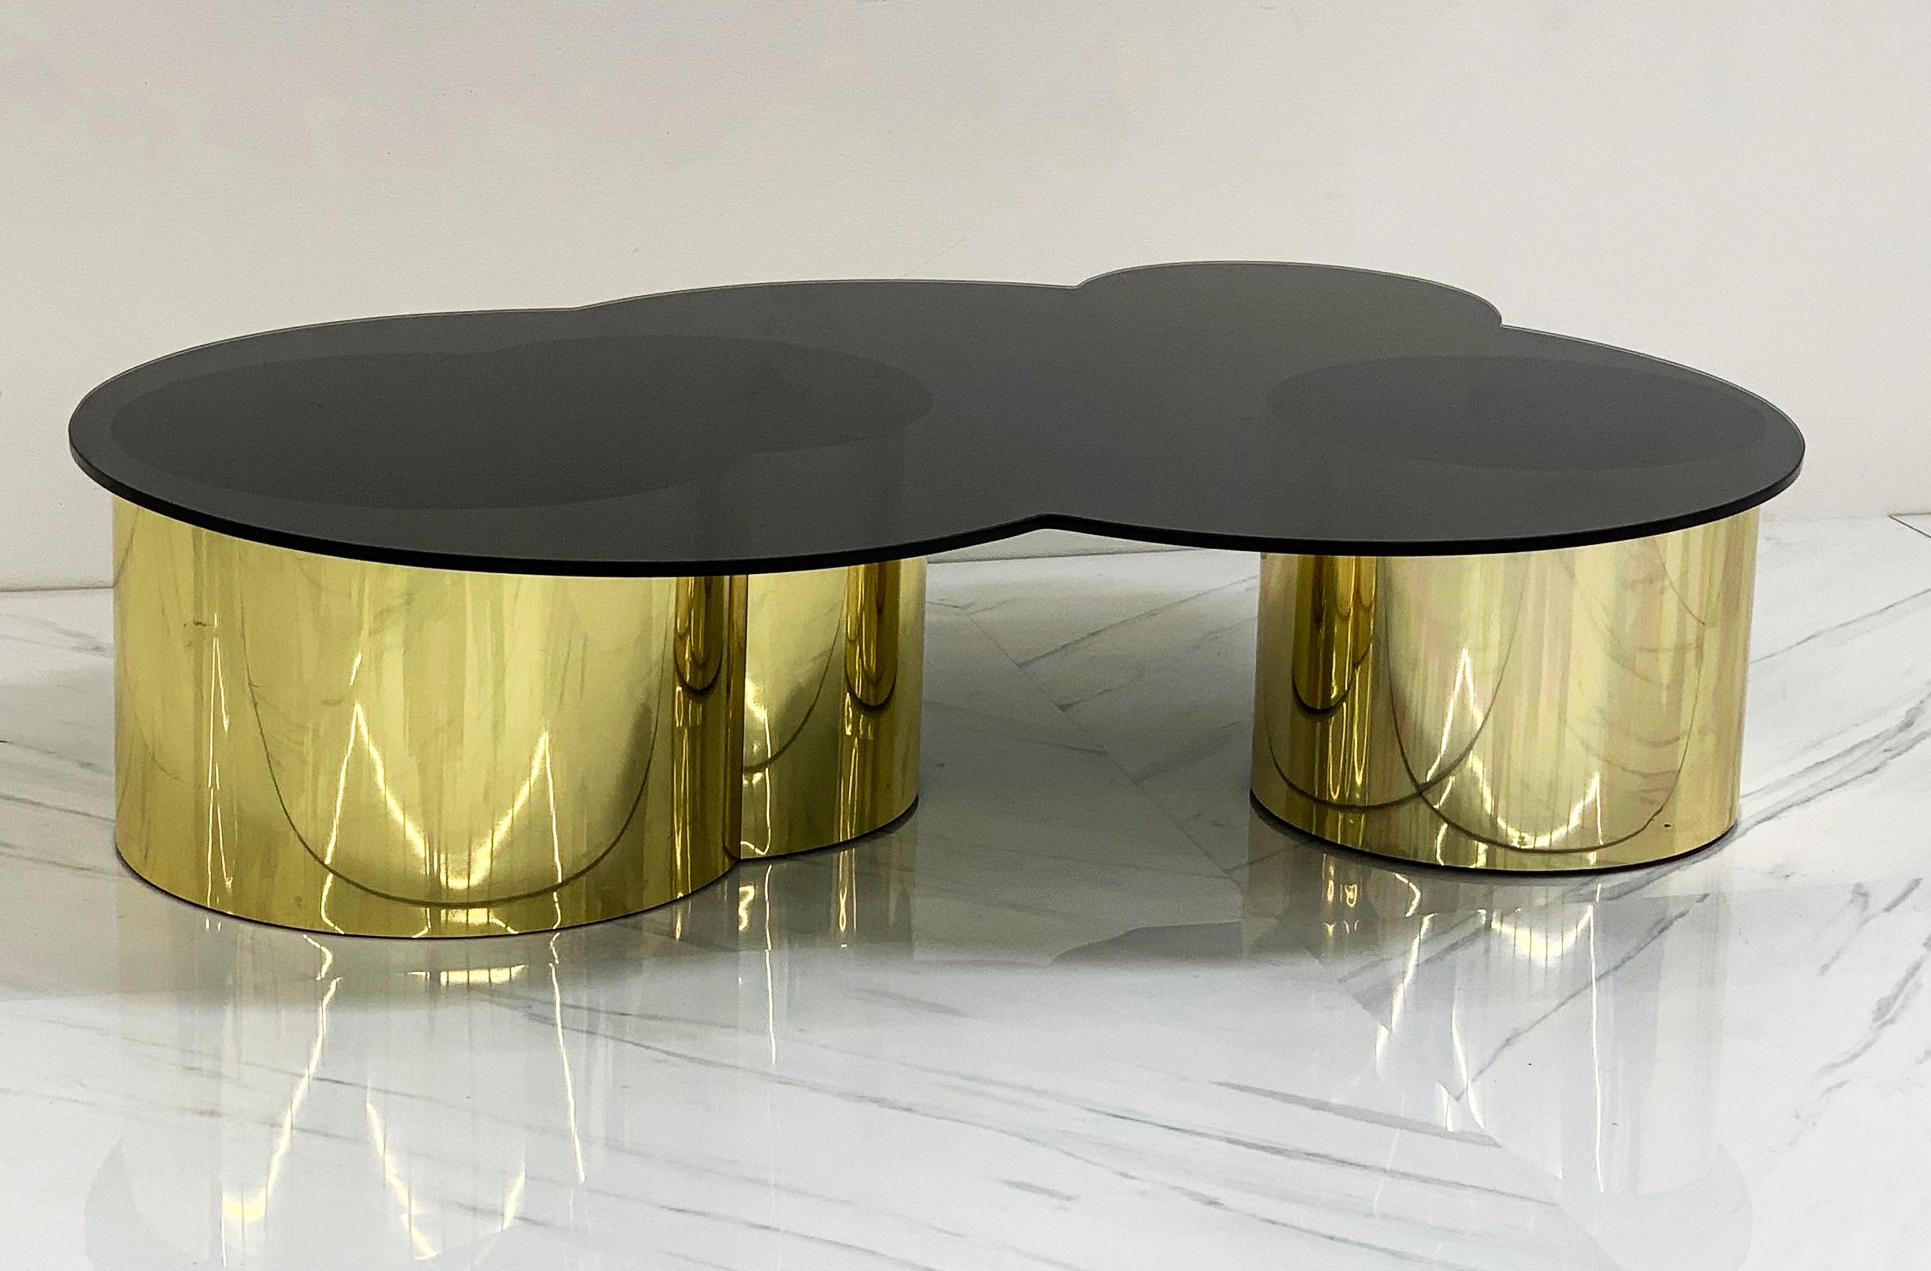 Free Form Biomorphic Brass and Glass Coffee Table, 1970's For Sale 2